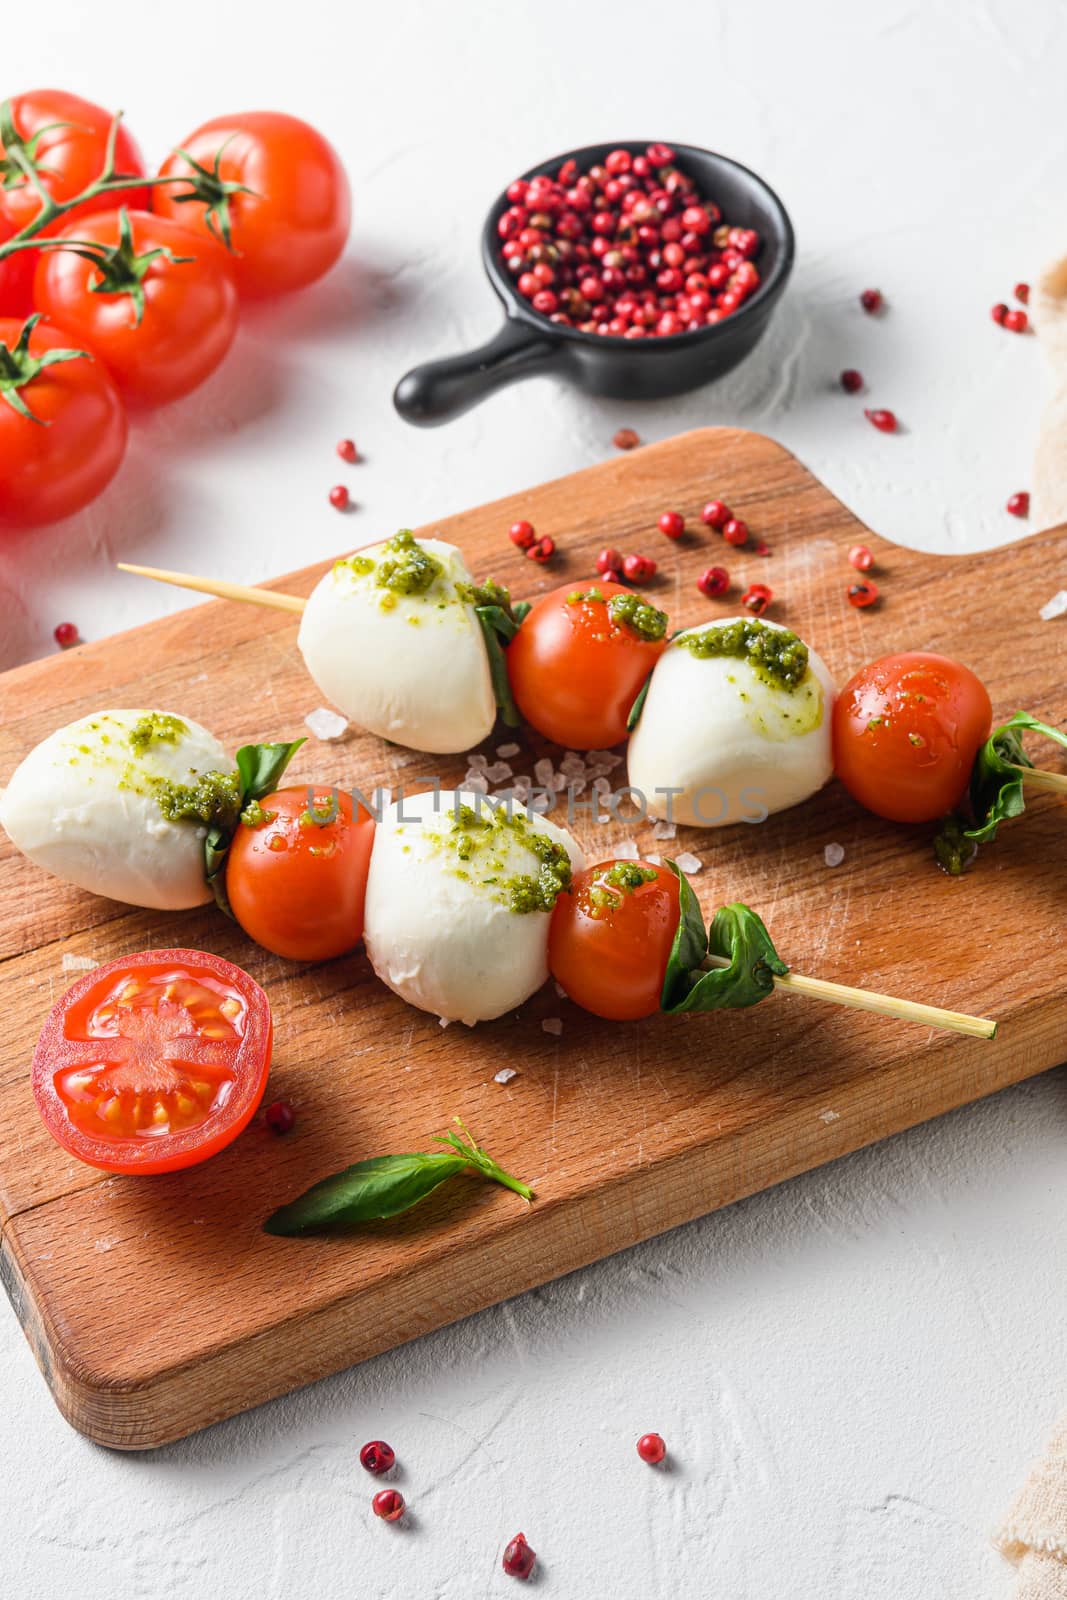 talian food - caprese salad - skewer with tomato, mozzarella and basil, pesto sauce, mediterranean diet concept on old chopping board and linen cloth top view vertical selective focus with ingredients by Ilianesolenyi